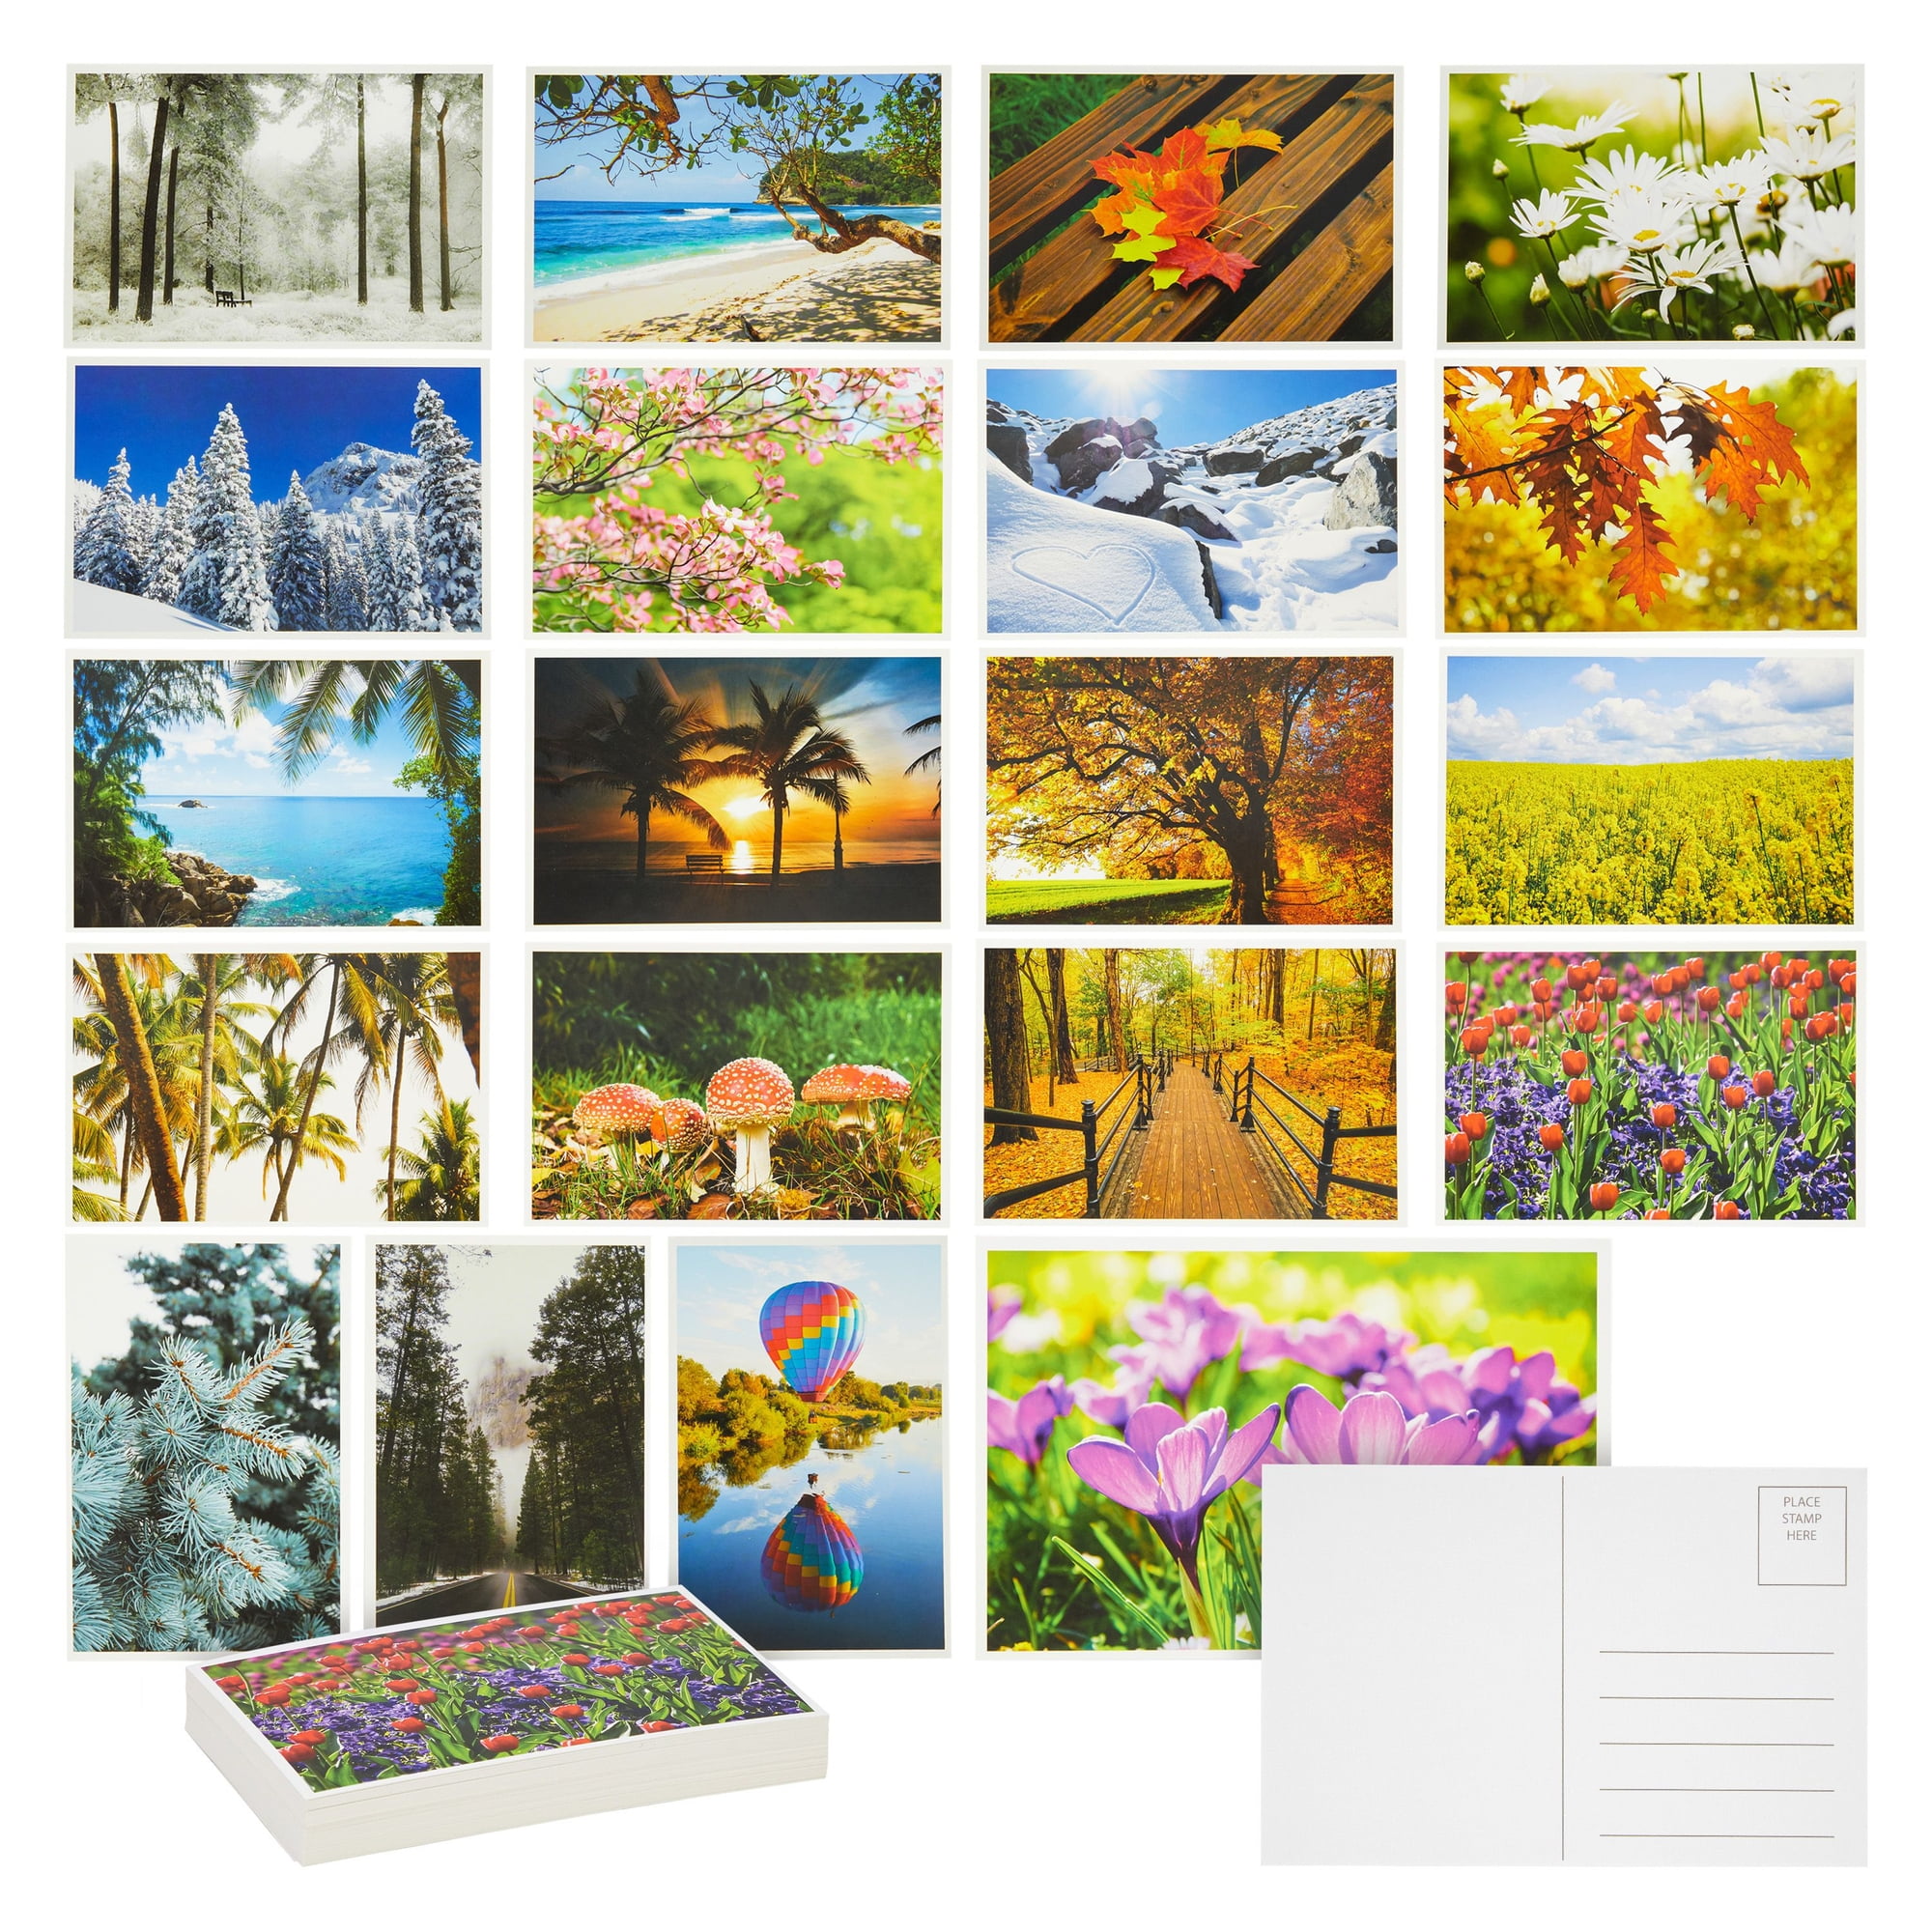 Nature Watercolors, 40 Thank You Cards with Envelopes: (4 1/2 x 3 inch Blank Cards in 8 Unique Designs)